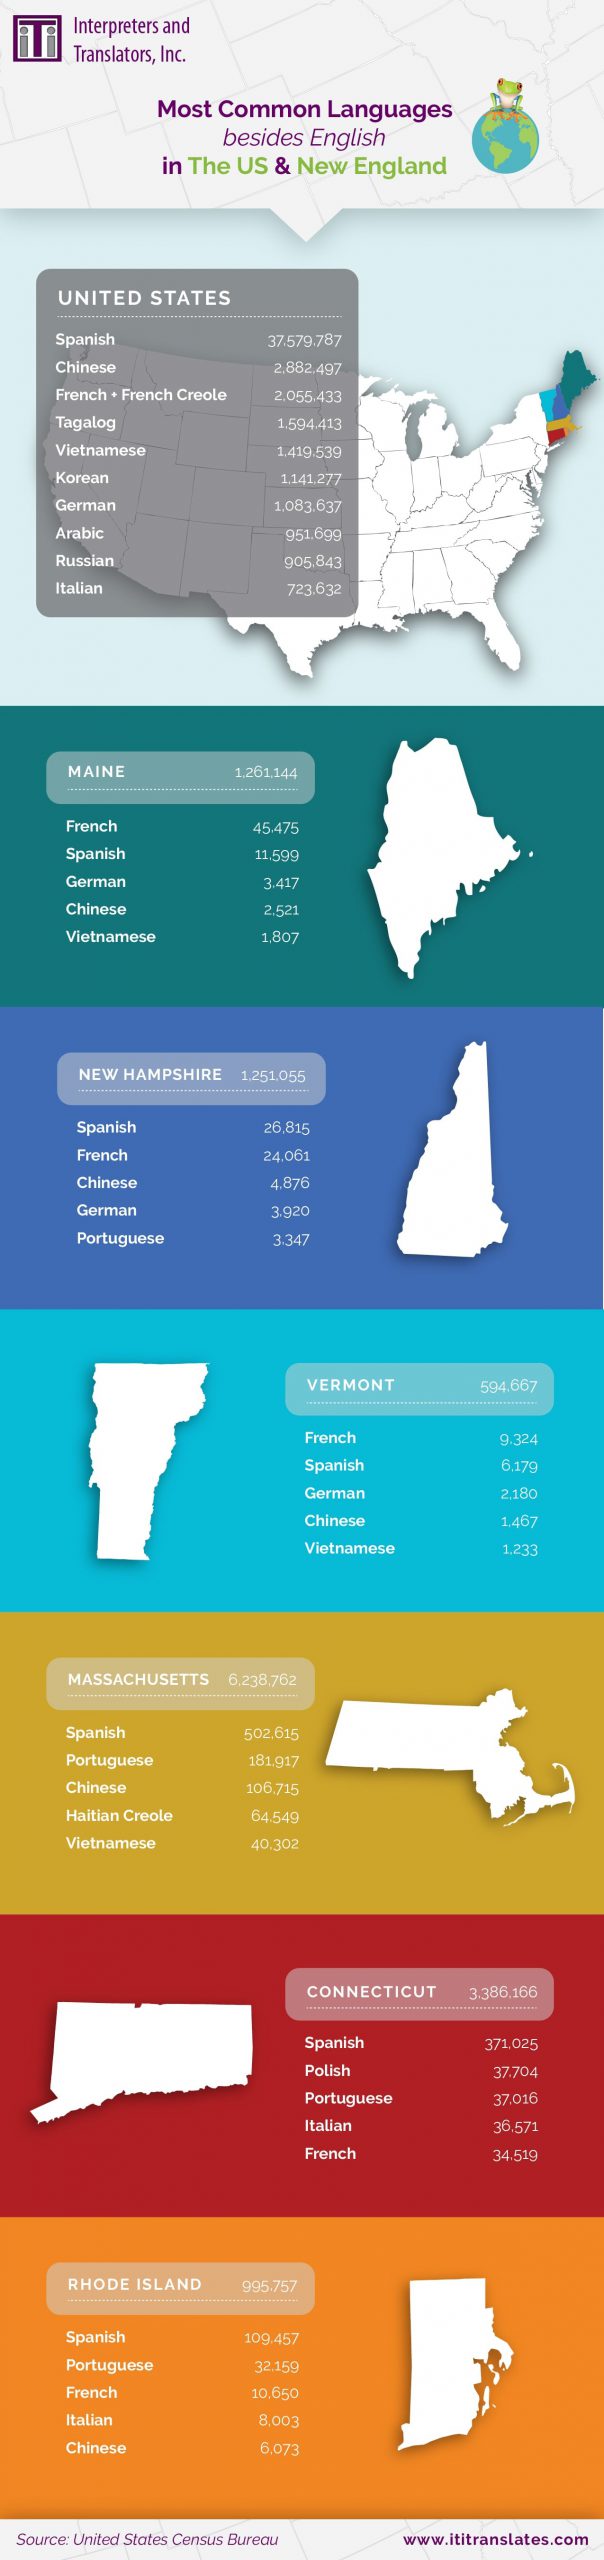 Infographic on the most common languages besides English in the US and New England